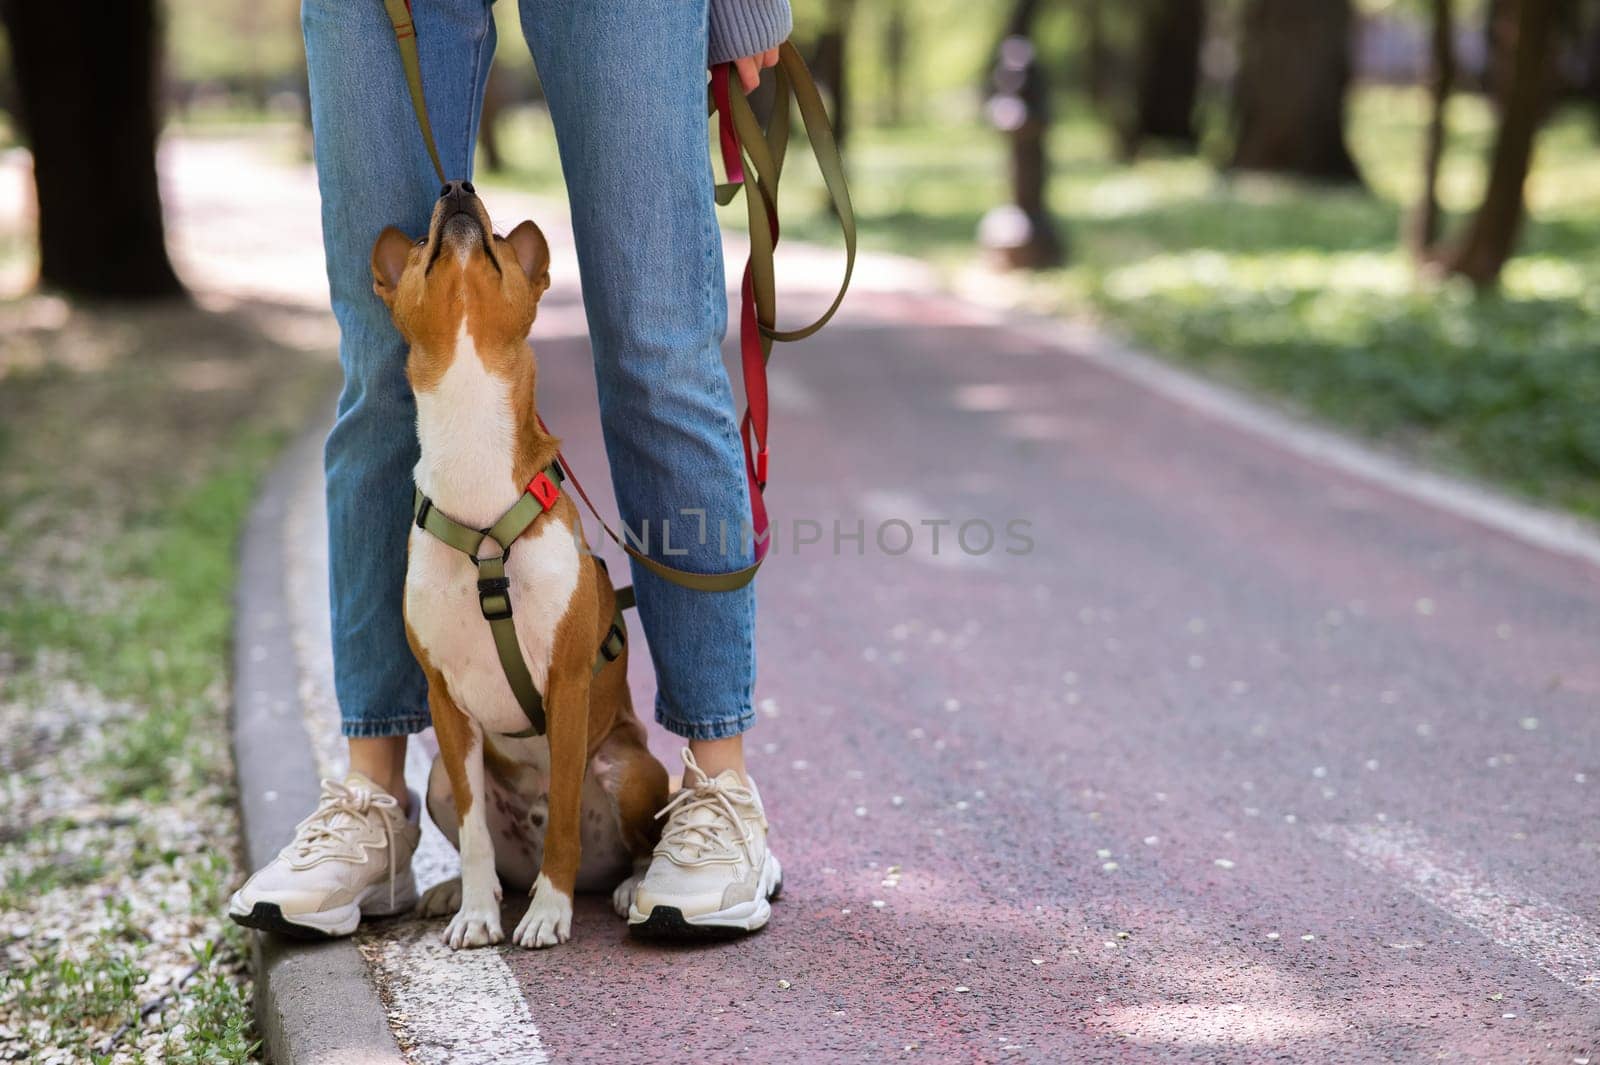 An African basenji dog sits at the feet of its owner in the park